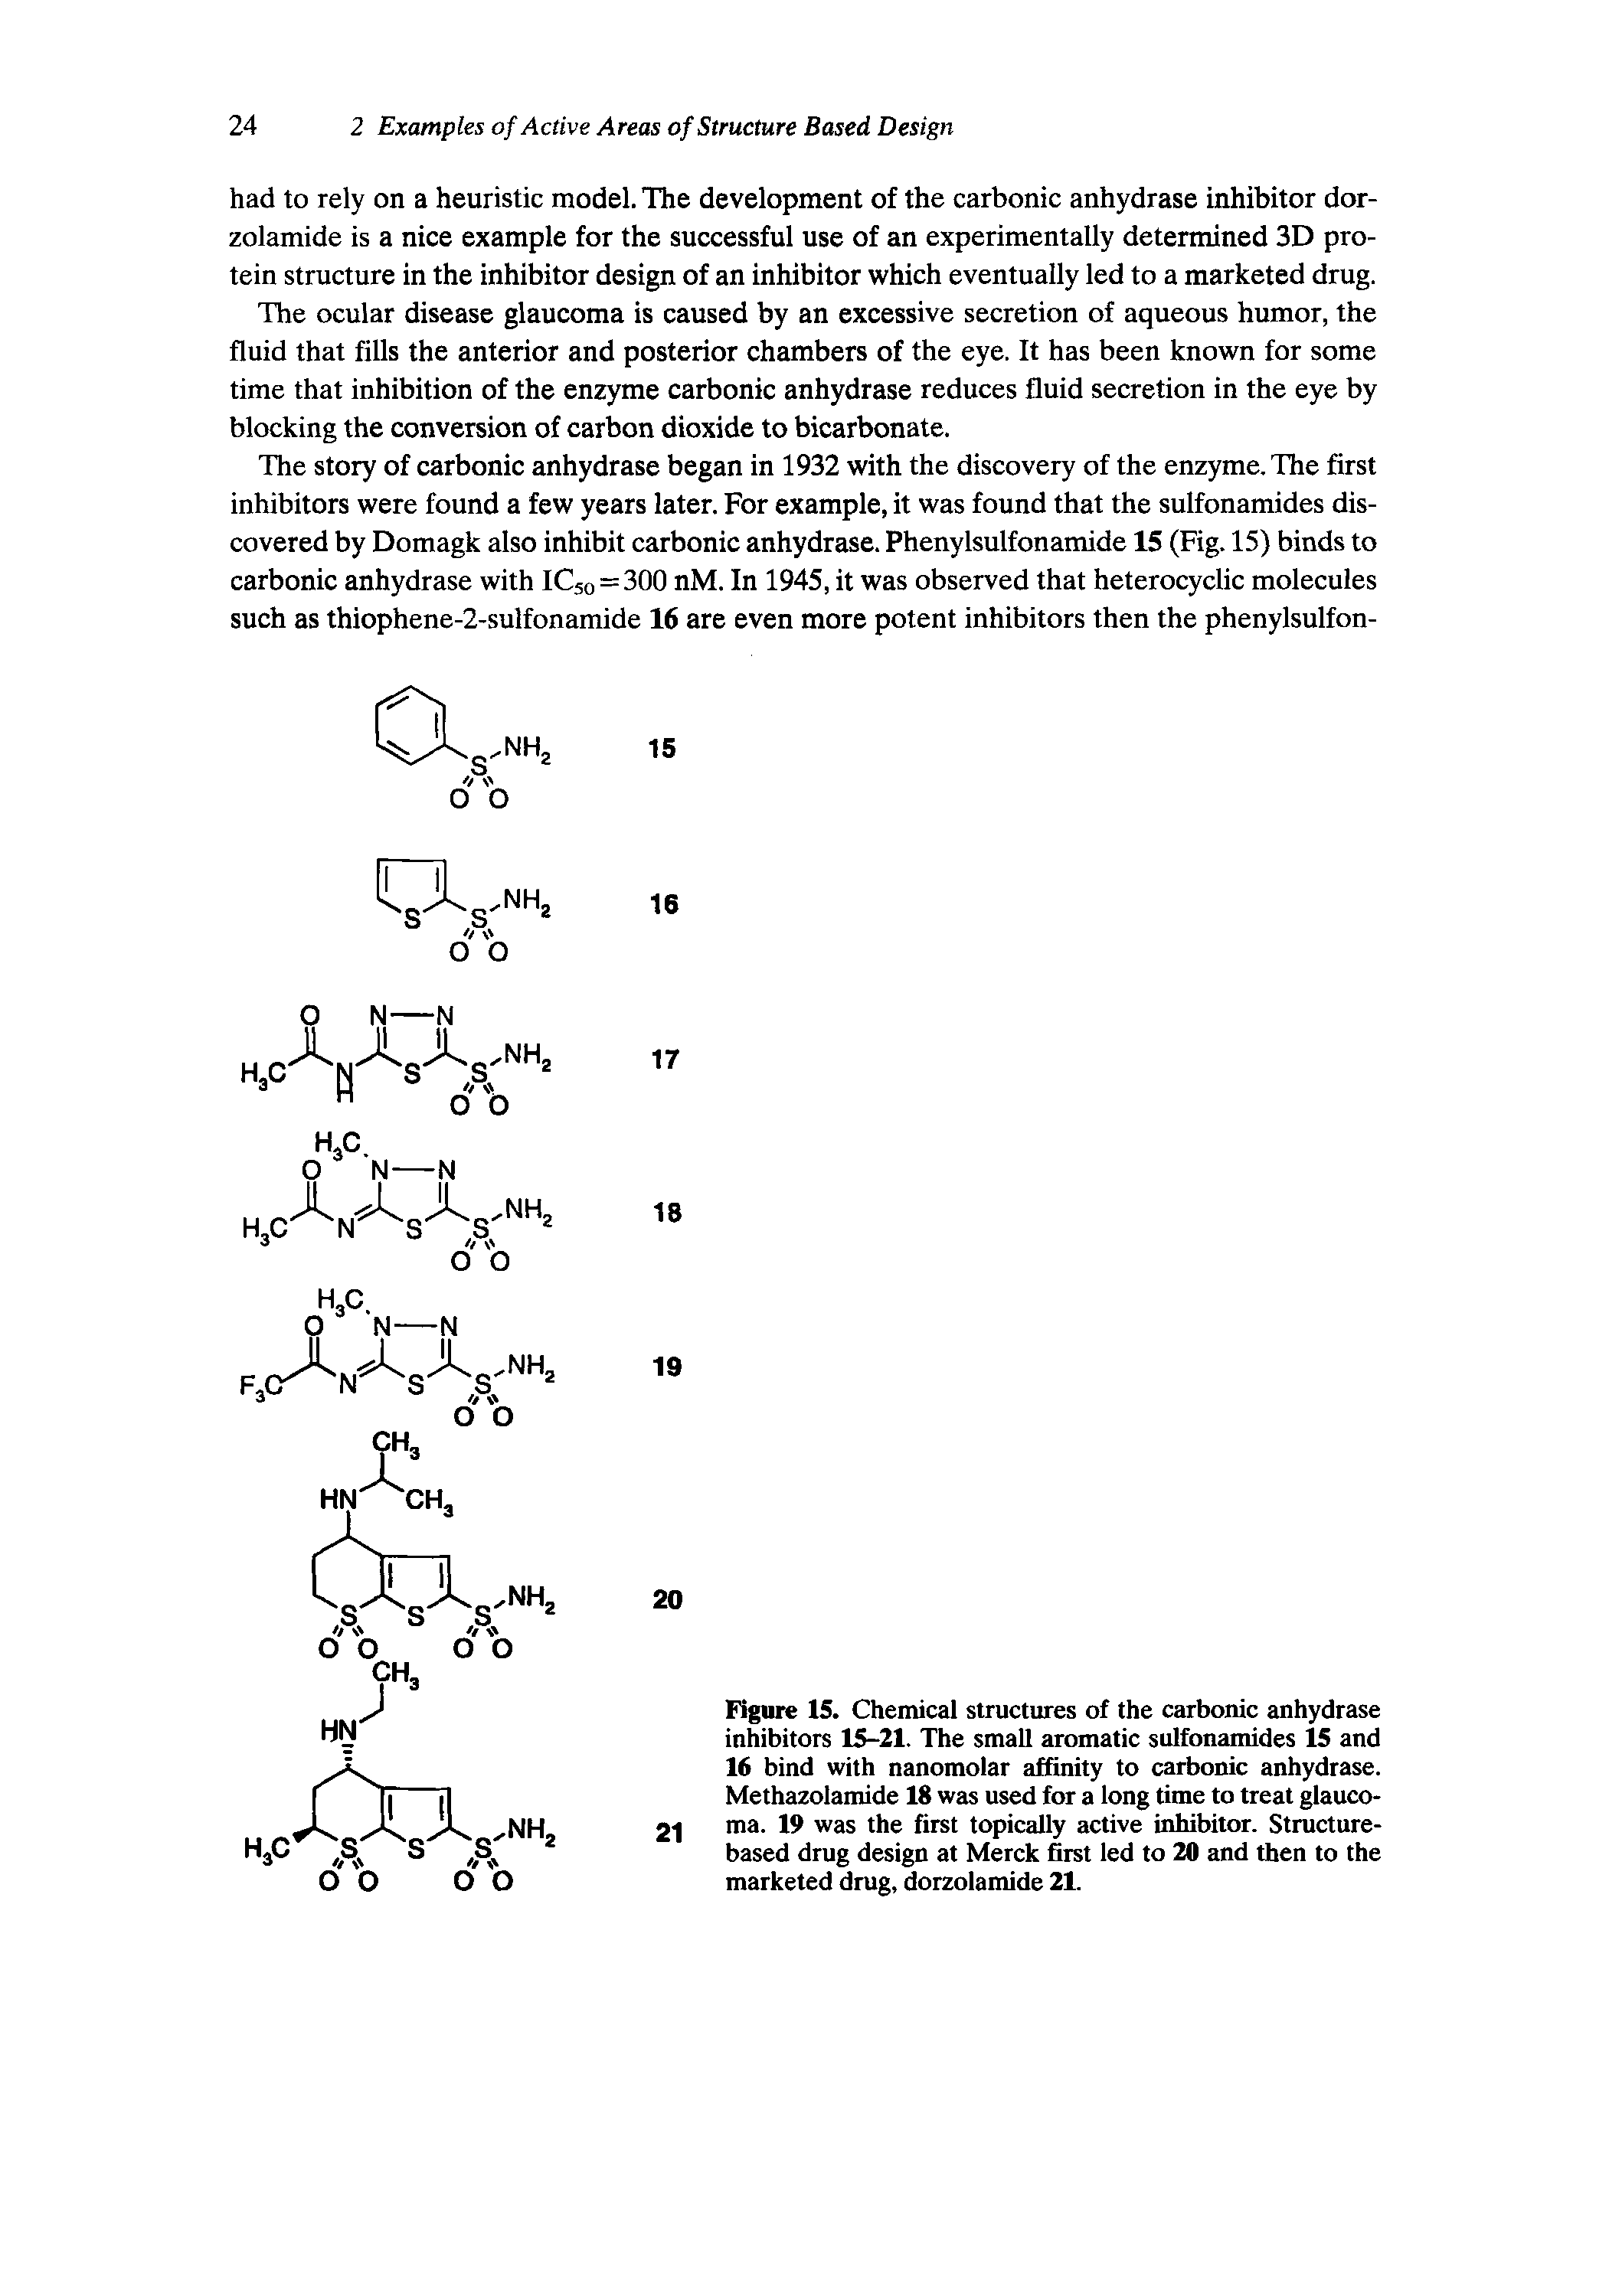 Figure 15. Chemical structures of the carbonic anhydrase inhibitors 15-21. The small aromatic sulfonamides 15 and 16 bind with nanomolar affinity to carbonic anhydrase. Methazolamide 18 was used for a long time to treat glaucoma. 19 was the first topically active inhibitor. Structure-based drug design at Merck first led to 20 and then to the marketed drug, dorzolamide 21.